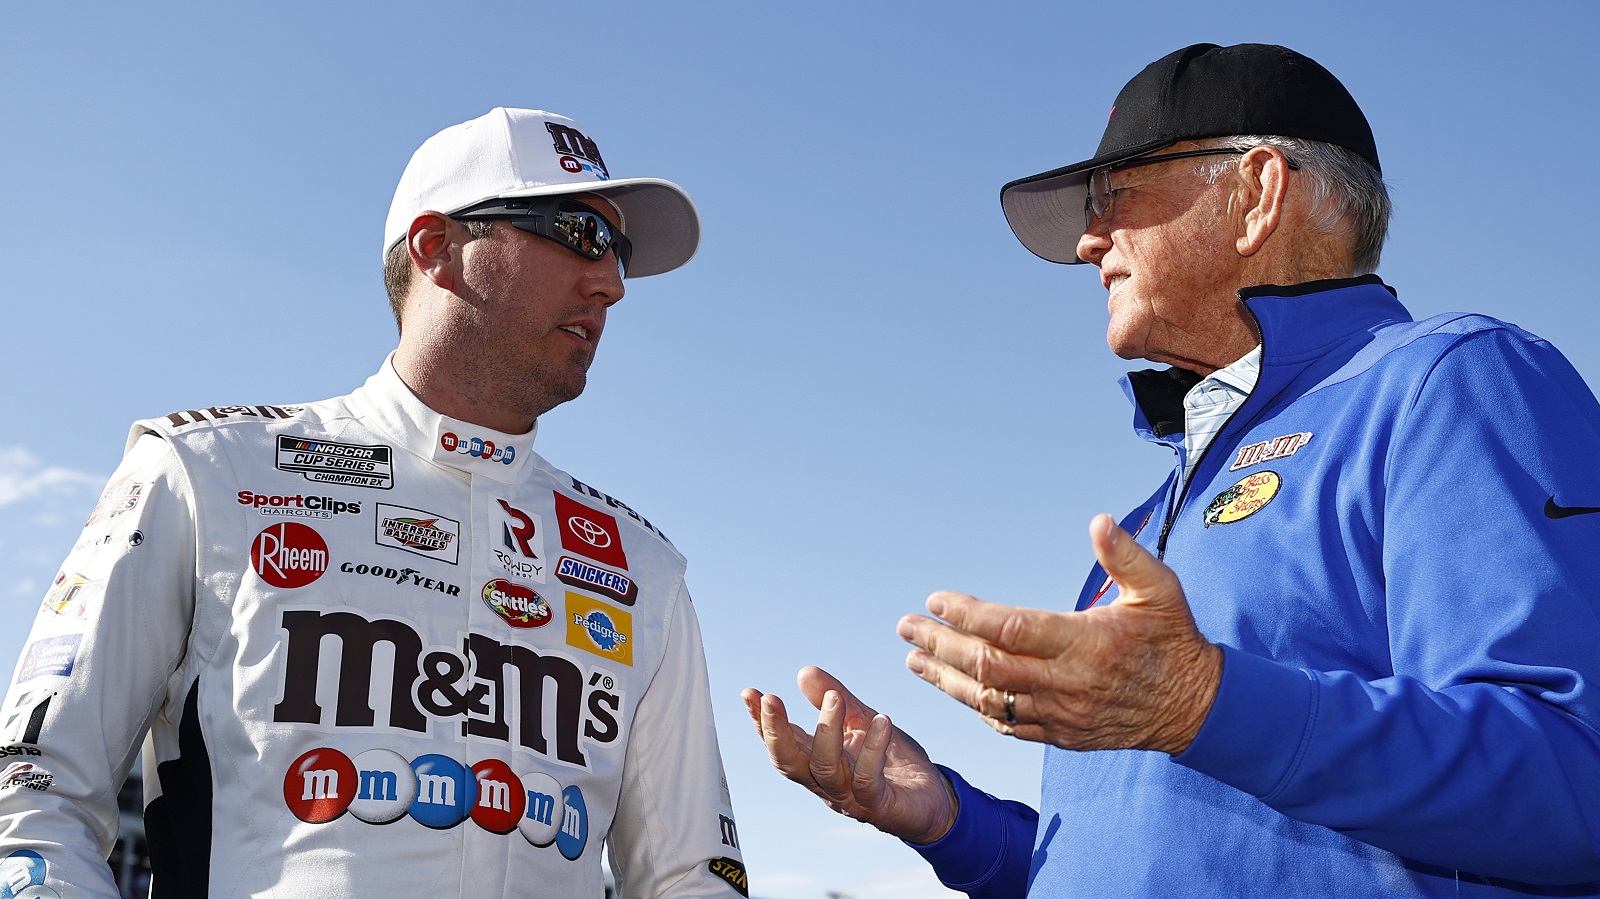 Kyle Busch, driver of the No. 18 Toyota, and Hall of Famer and team owner Joe Gibbs talk on the grid prior to the NASCAR Cup Series Coca-Cola 600 at Charlotte Motor Speedway on May 30, 2021. | Jared C. Tilton/Getty Images